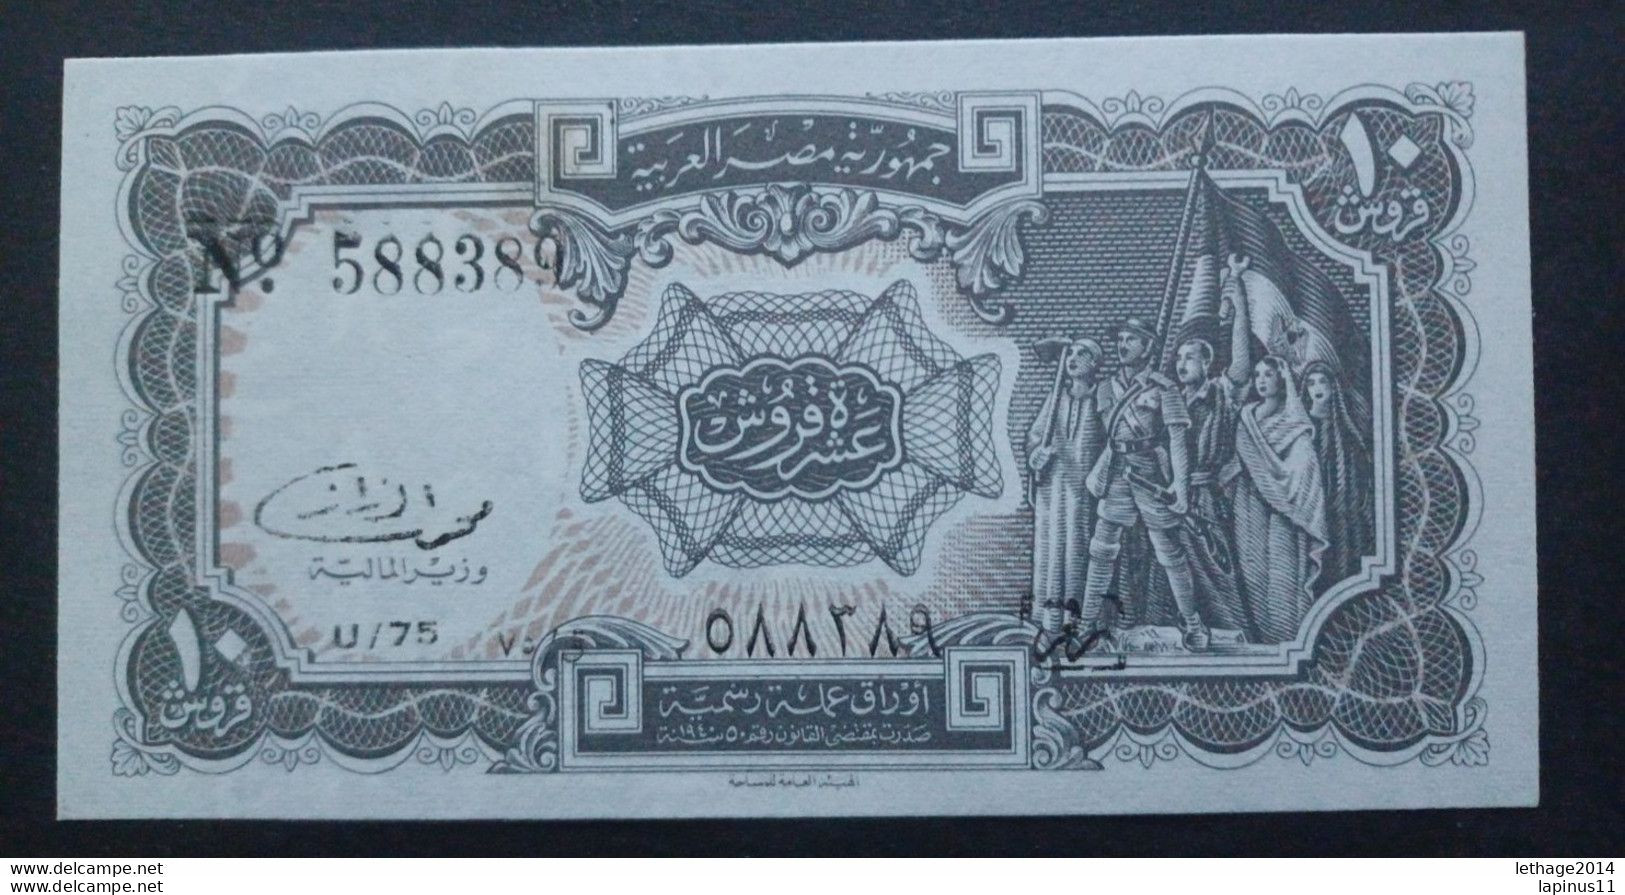 BANKNOTE EGYPT مصر EGYPT 10 PIASTRES 1952 UNCIRCULATED ERROR PRINT - Egypt